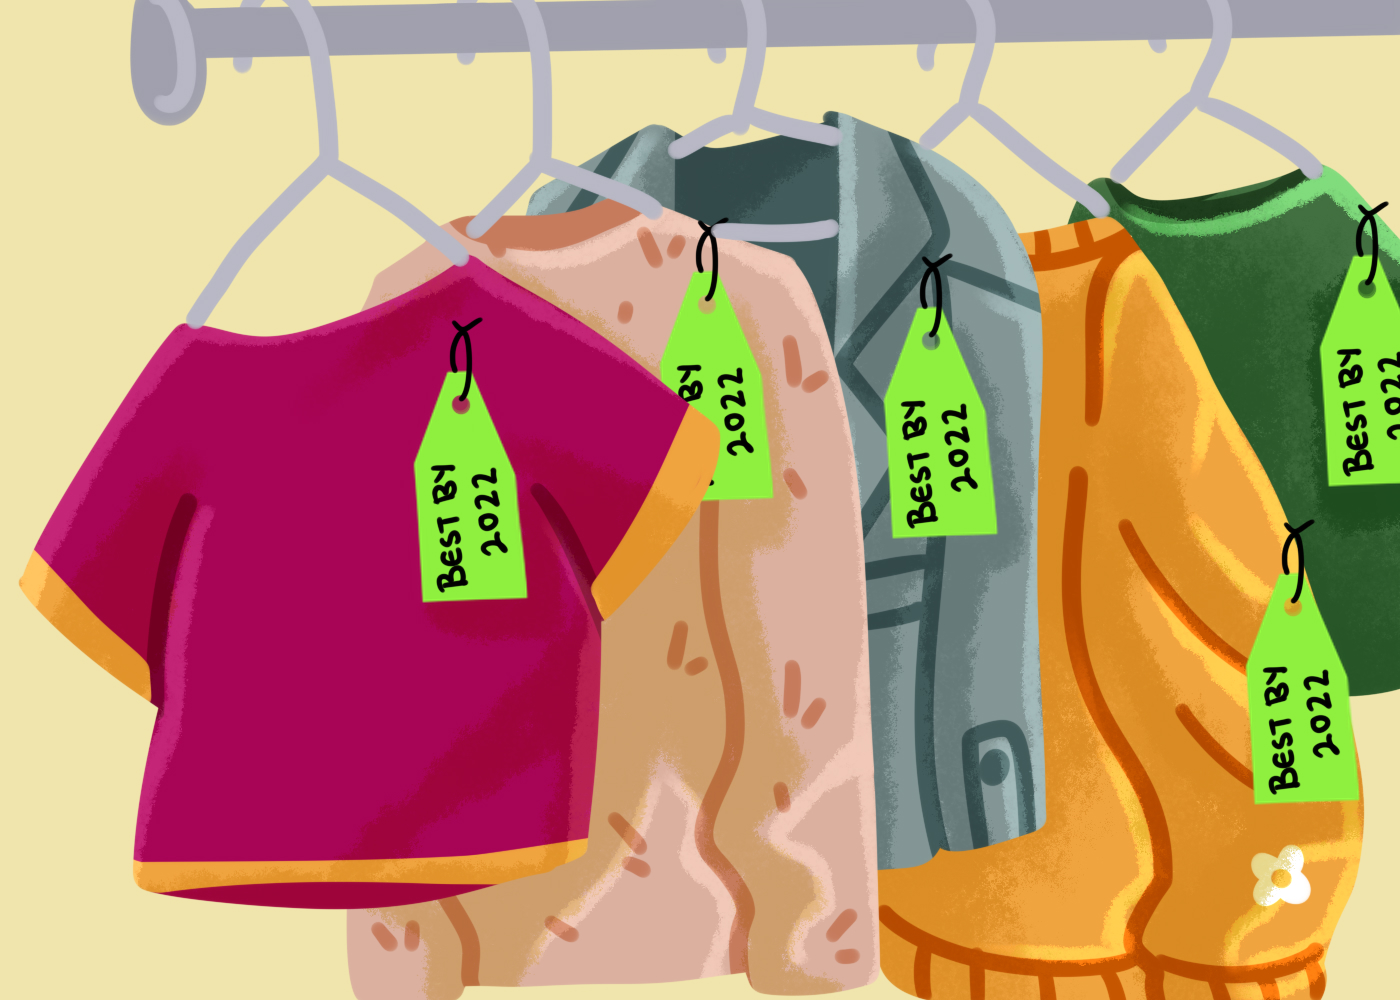 Illustration of clothes on a rack with best-by tags. Illustration by Sie Douglas-Fish.